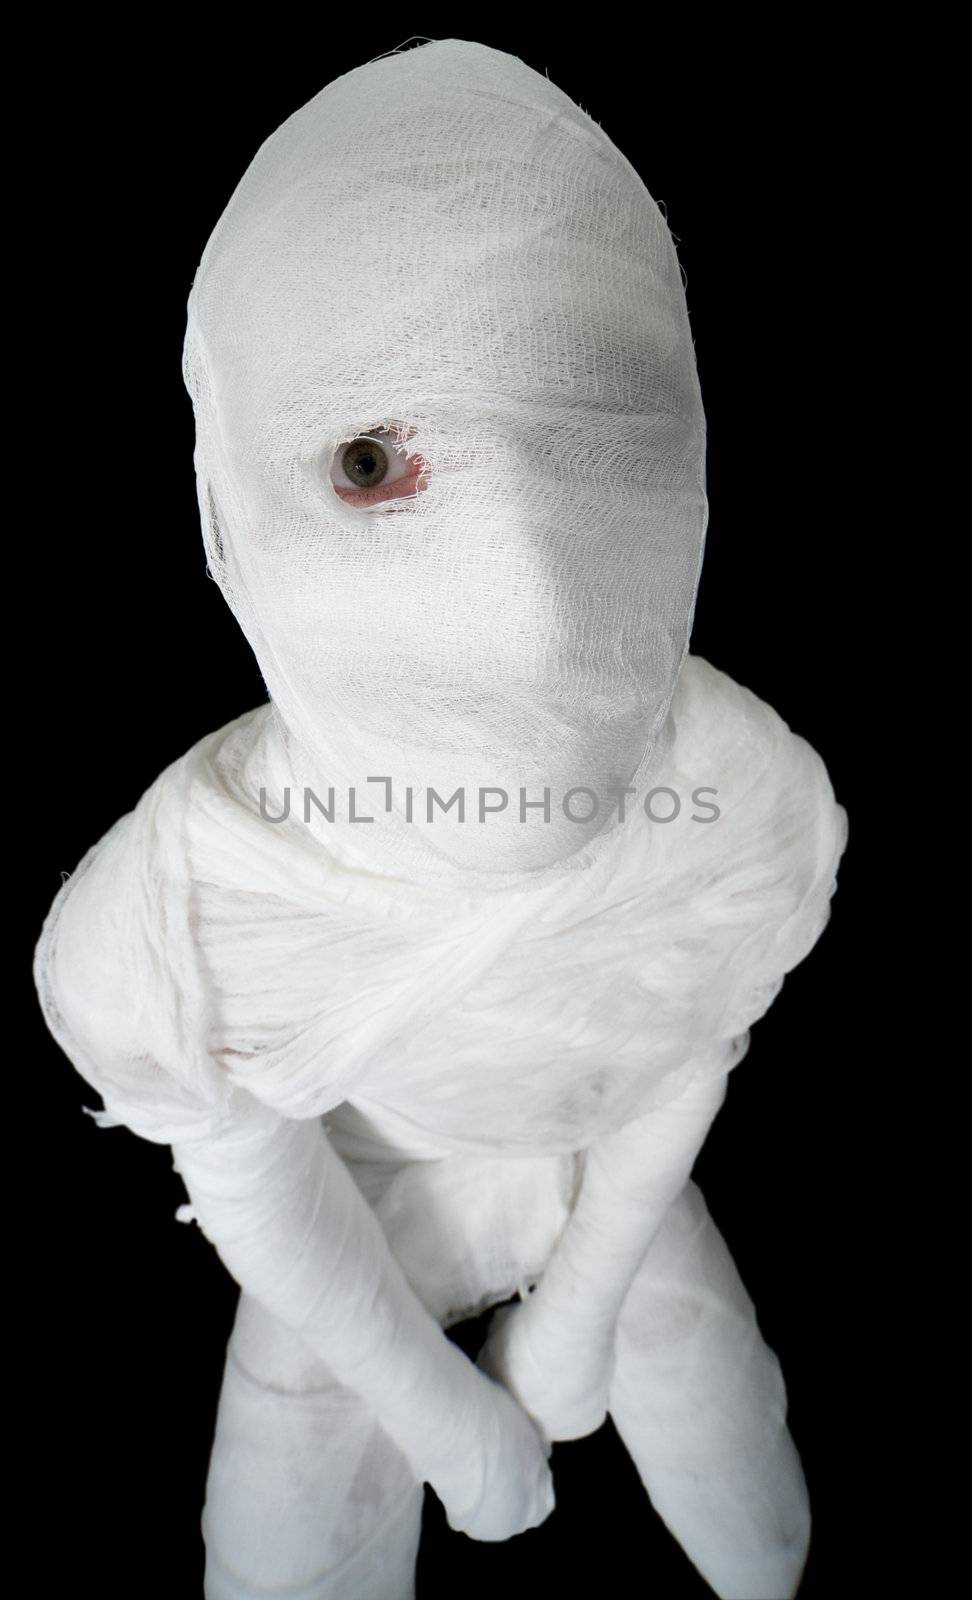 Mummy with open one eye on the black background